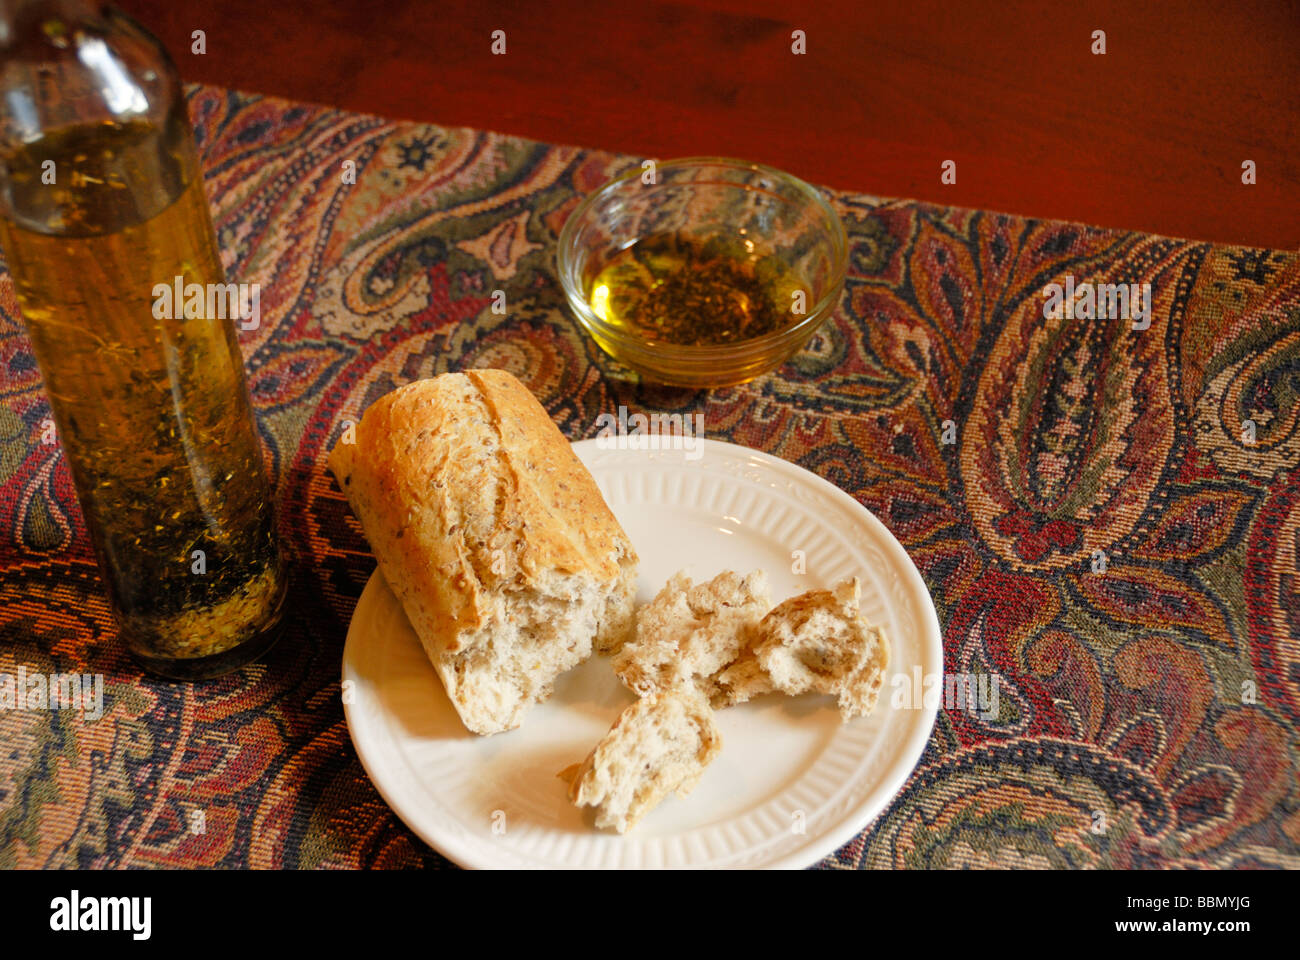 bread and oil Stock Photo